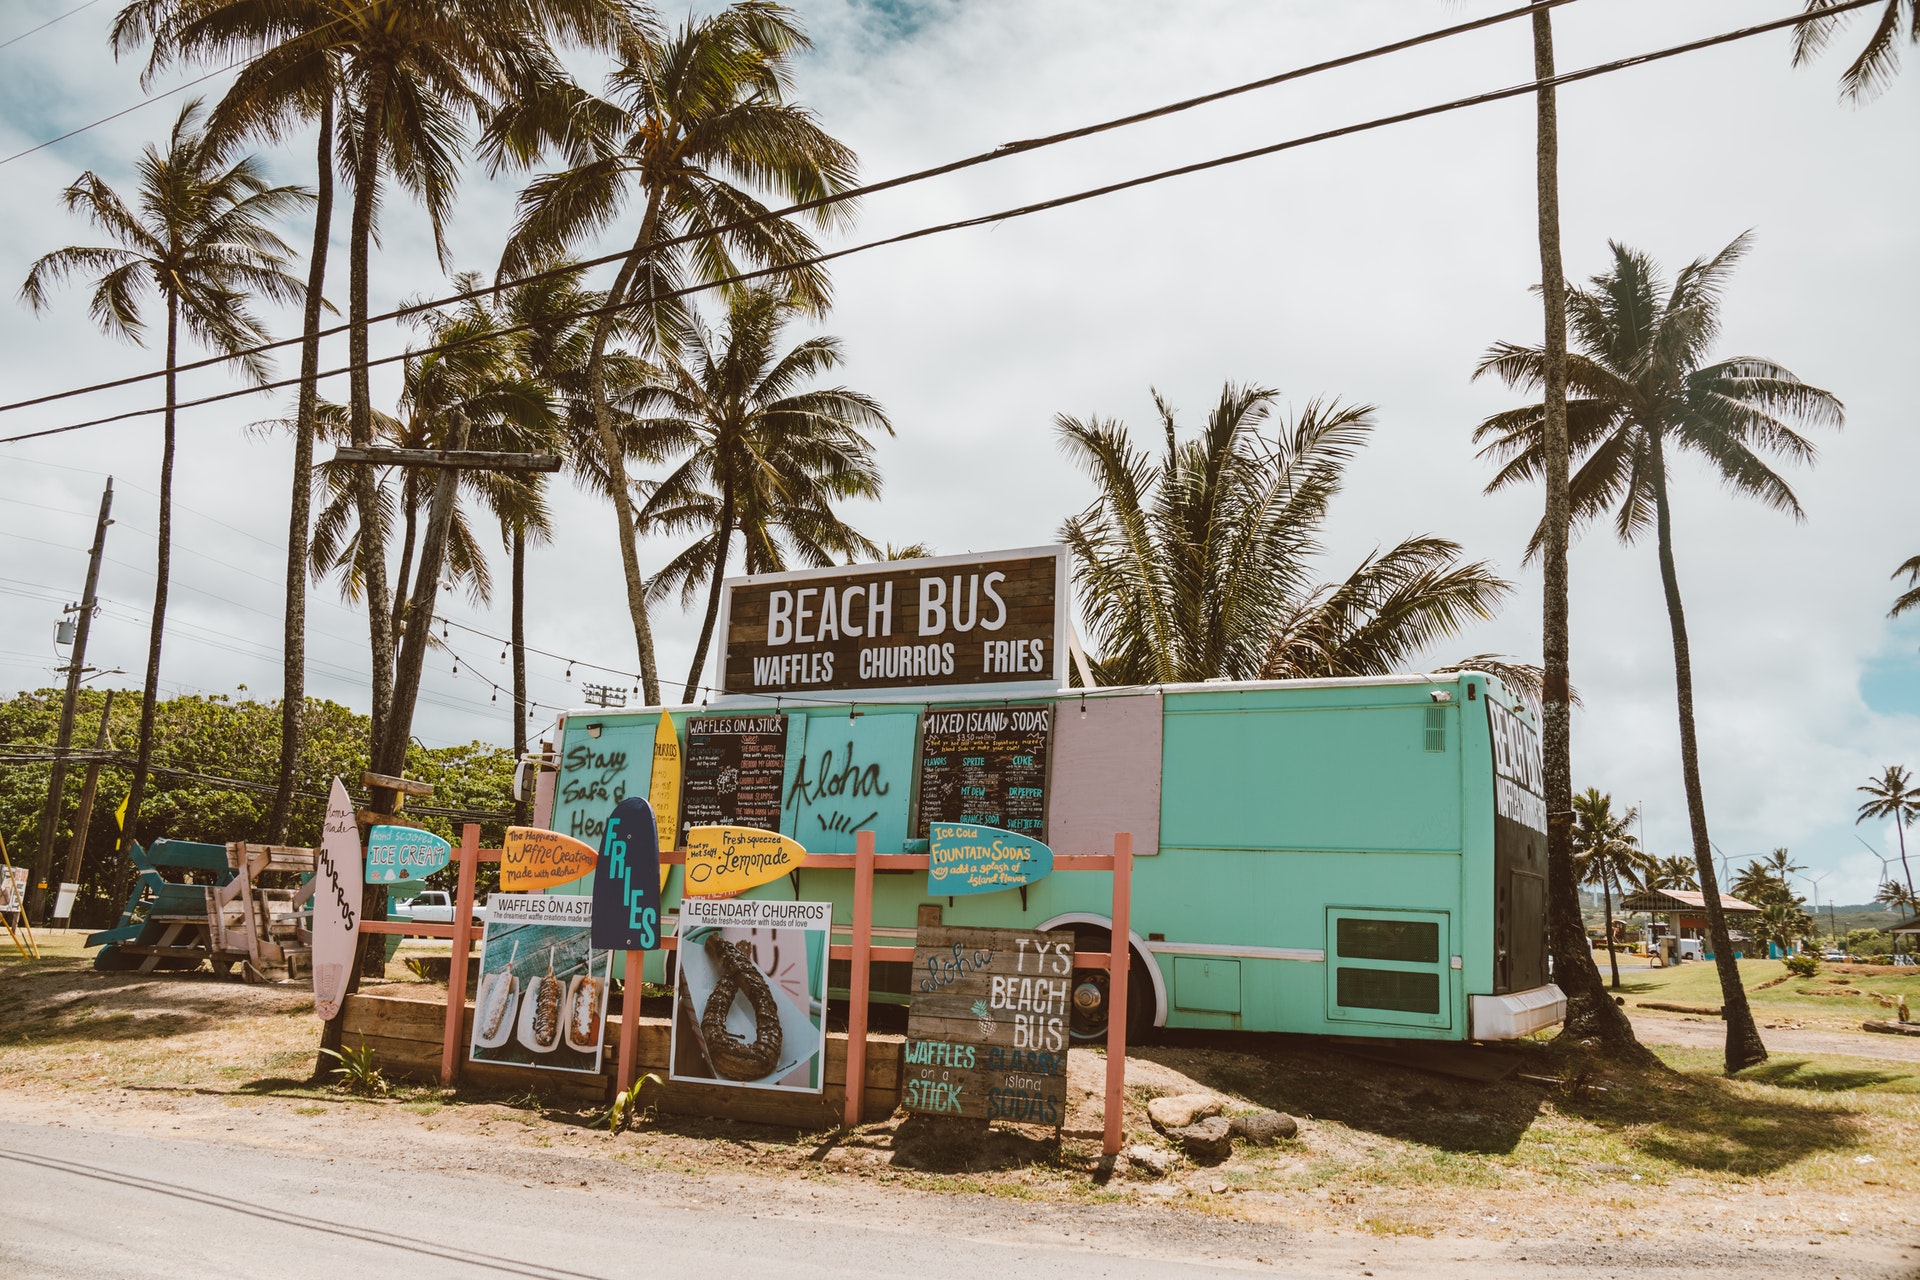 Food truck in vacation location